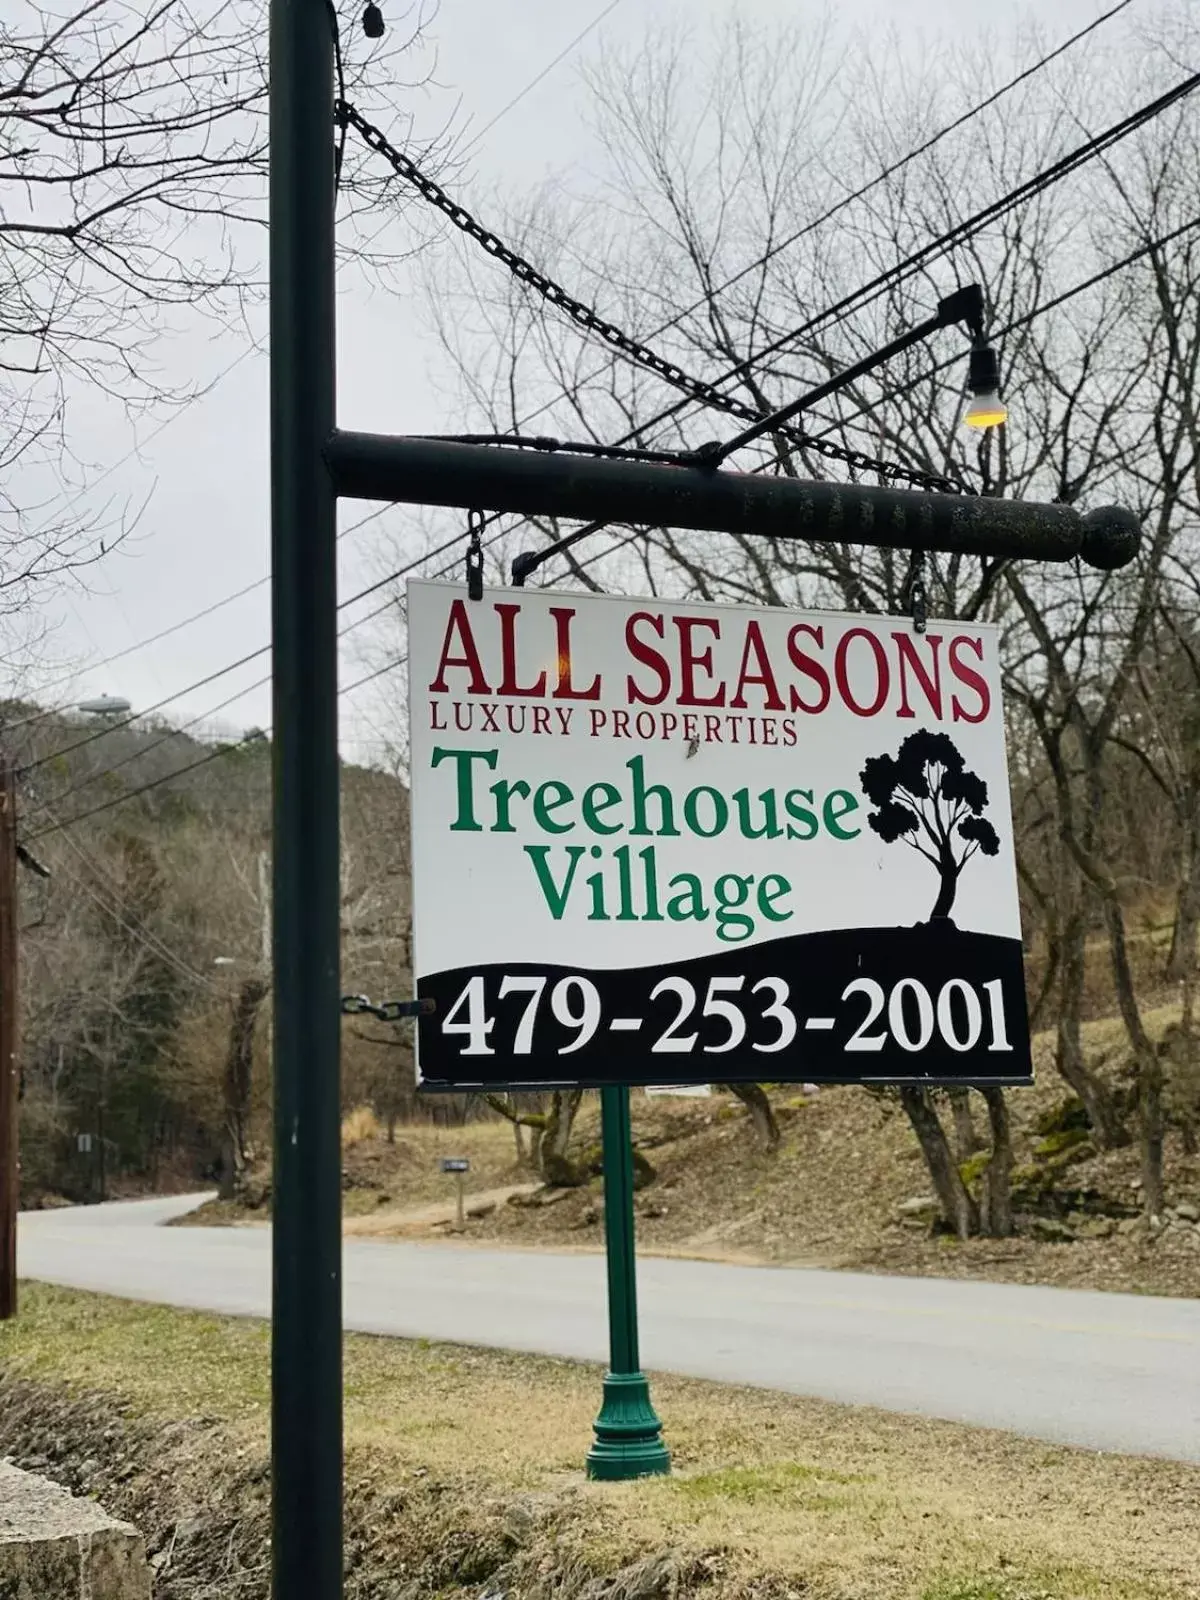 Property logo or sign in All Seasons Treehouse Village